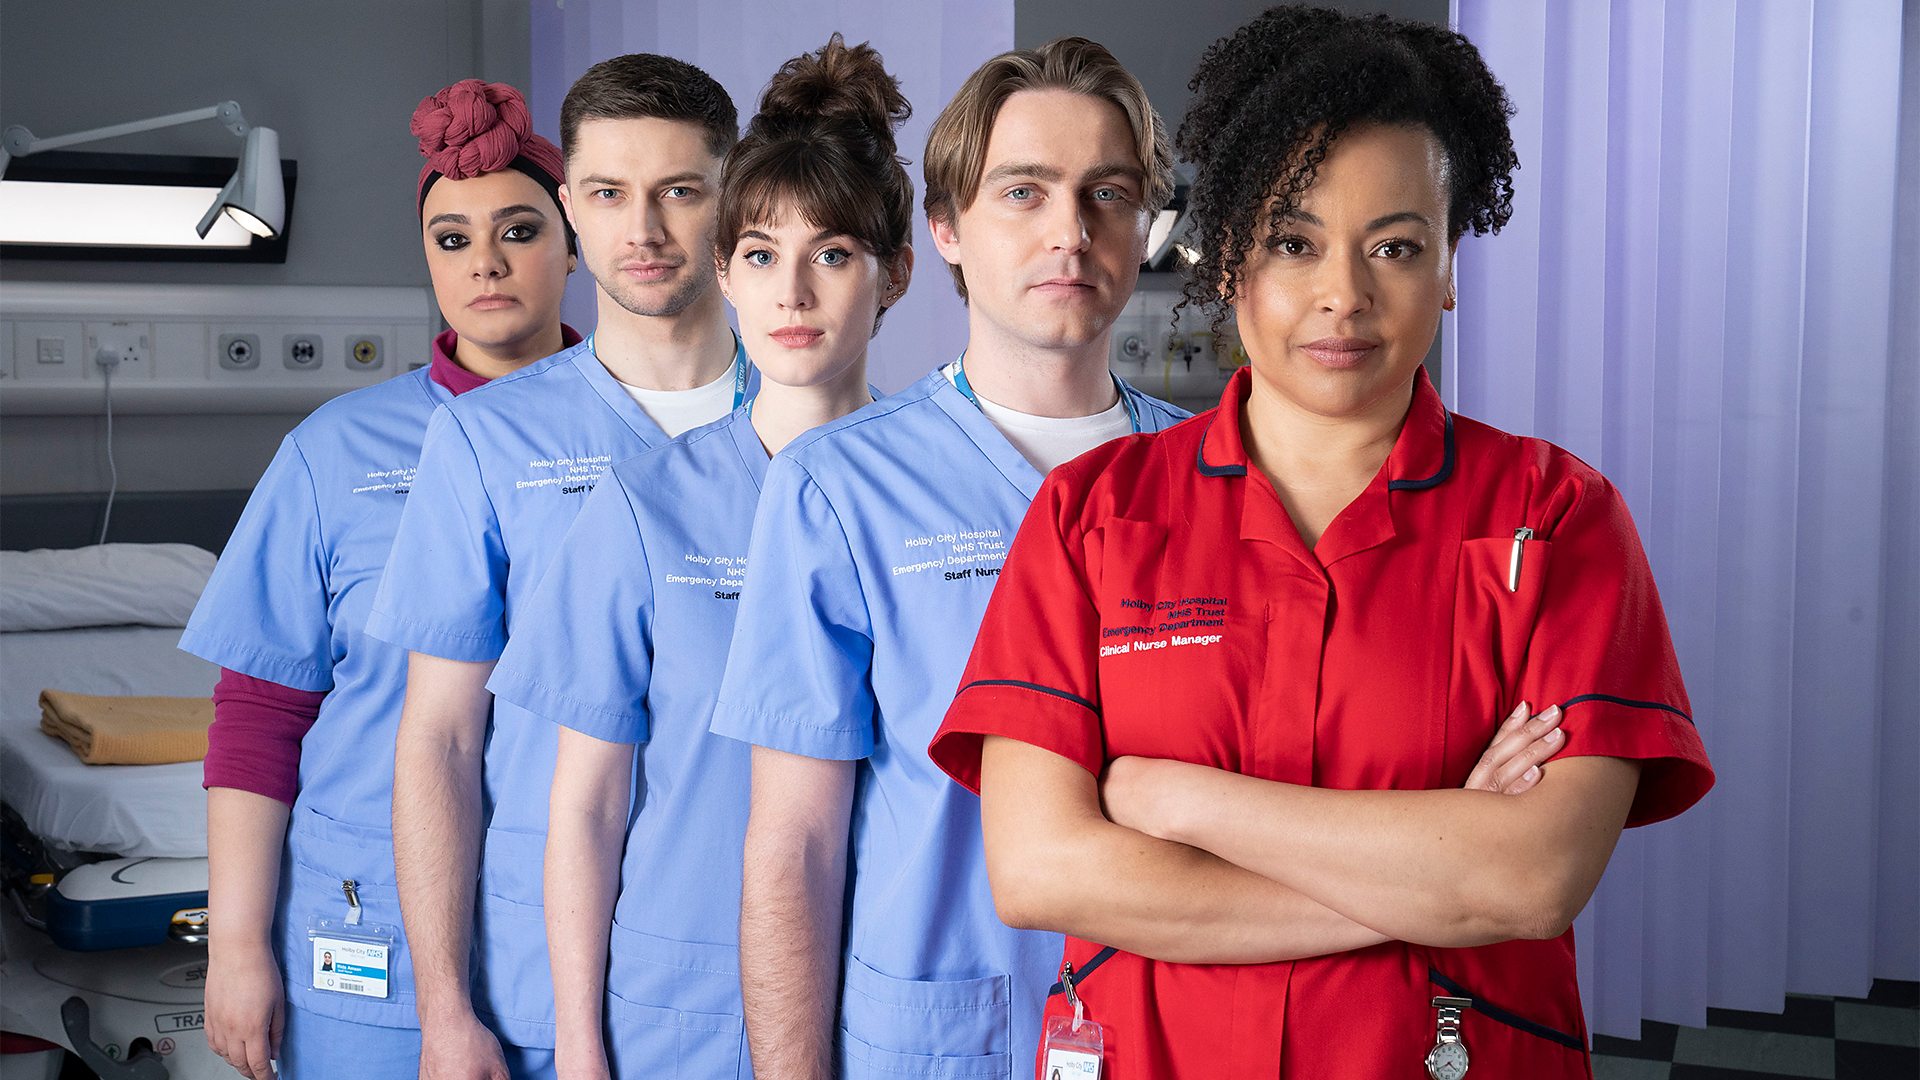 Casualty announces new cast members as Barney Walsh, Anna Chell, Sarah  Seggari and Eddie-Joe Robinson join as new nursing recruits - Media Centre